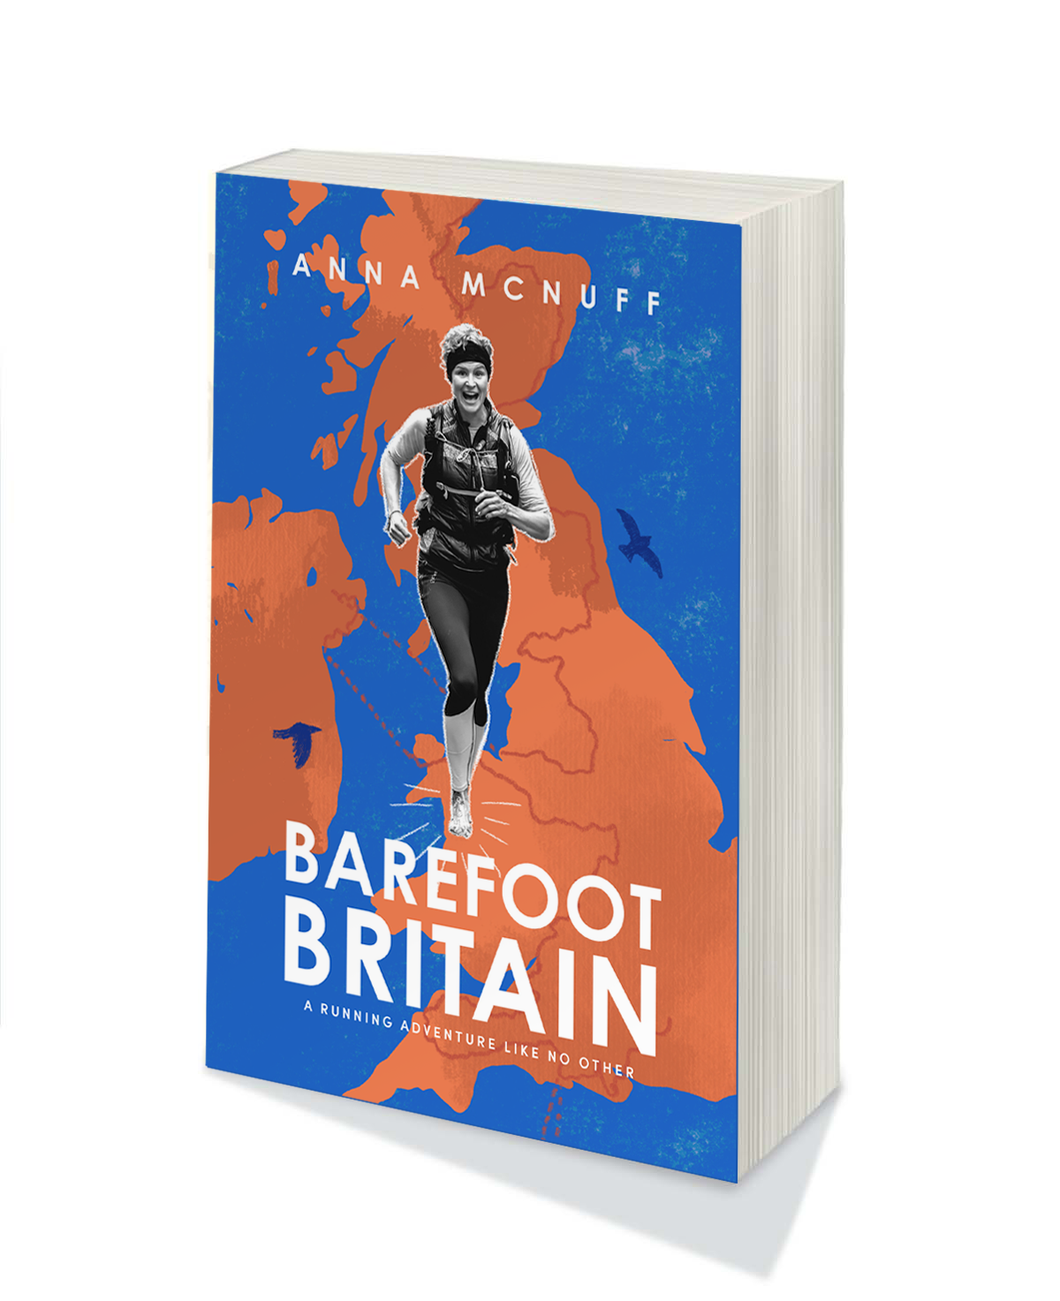 Barefoot Britain (Paperback): A Running Adventure Like No Other